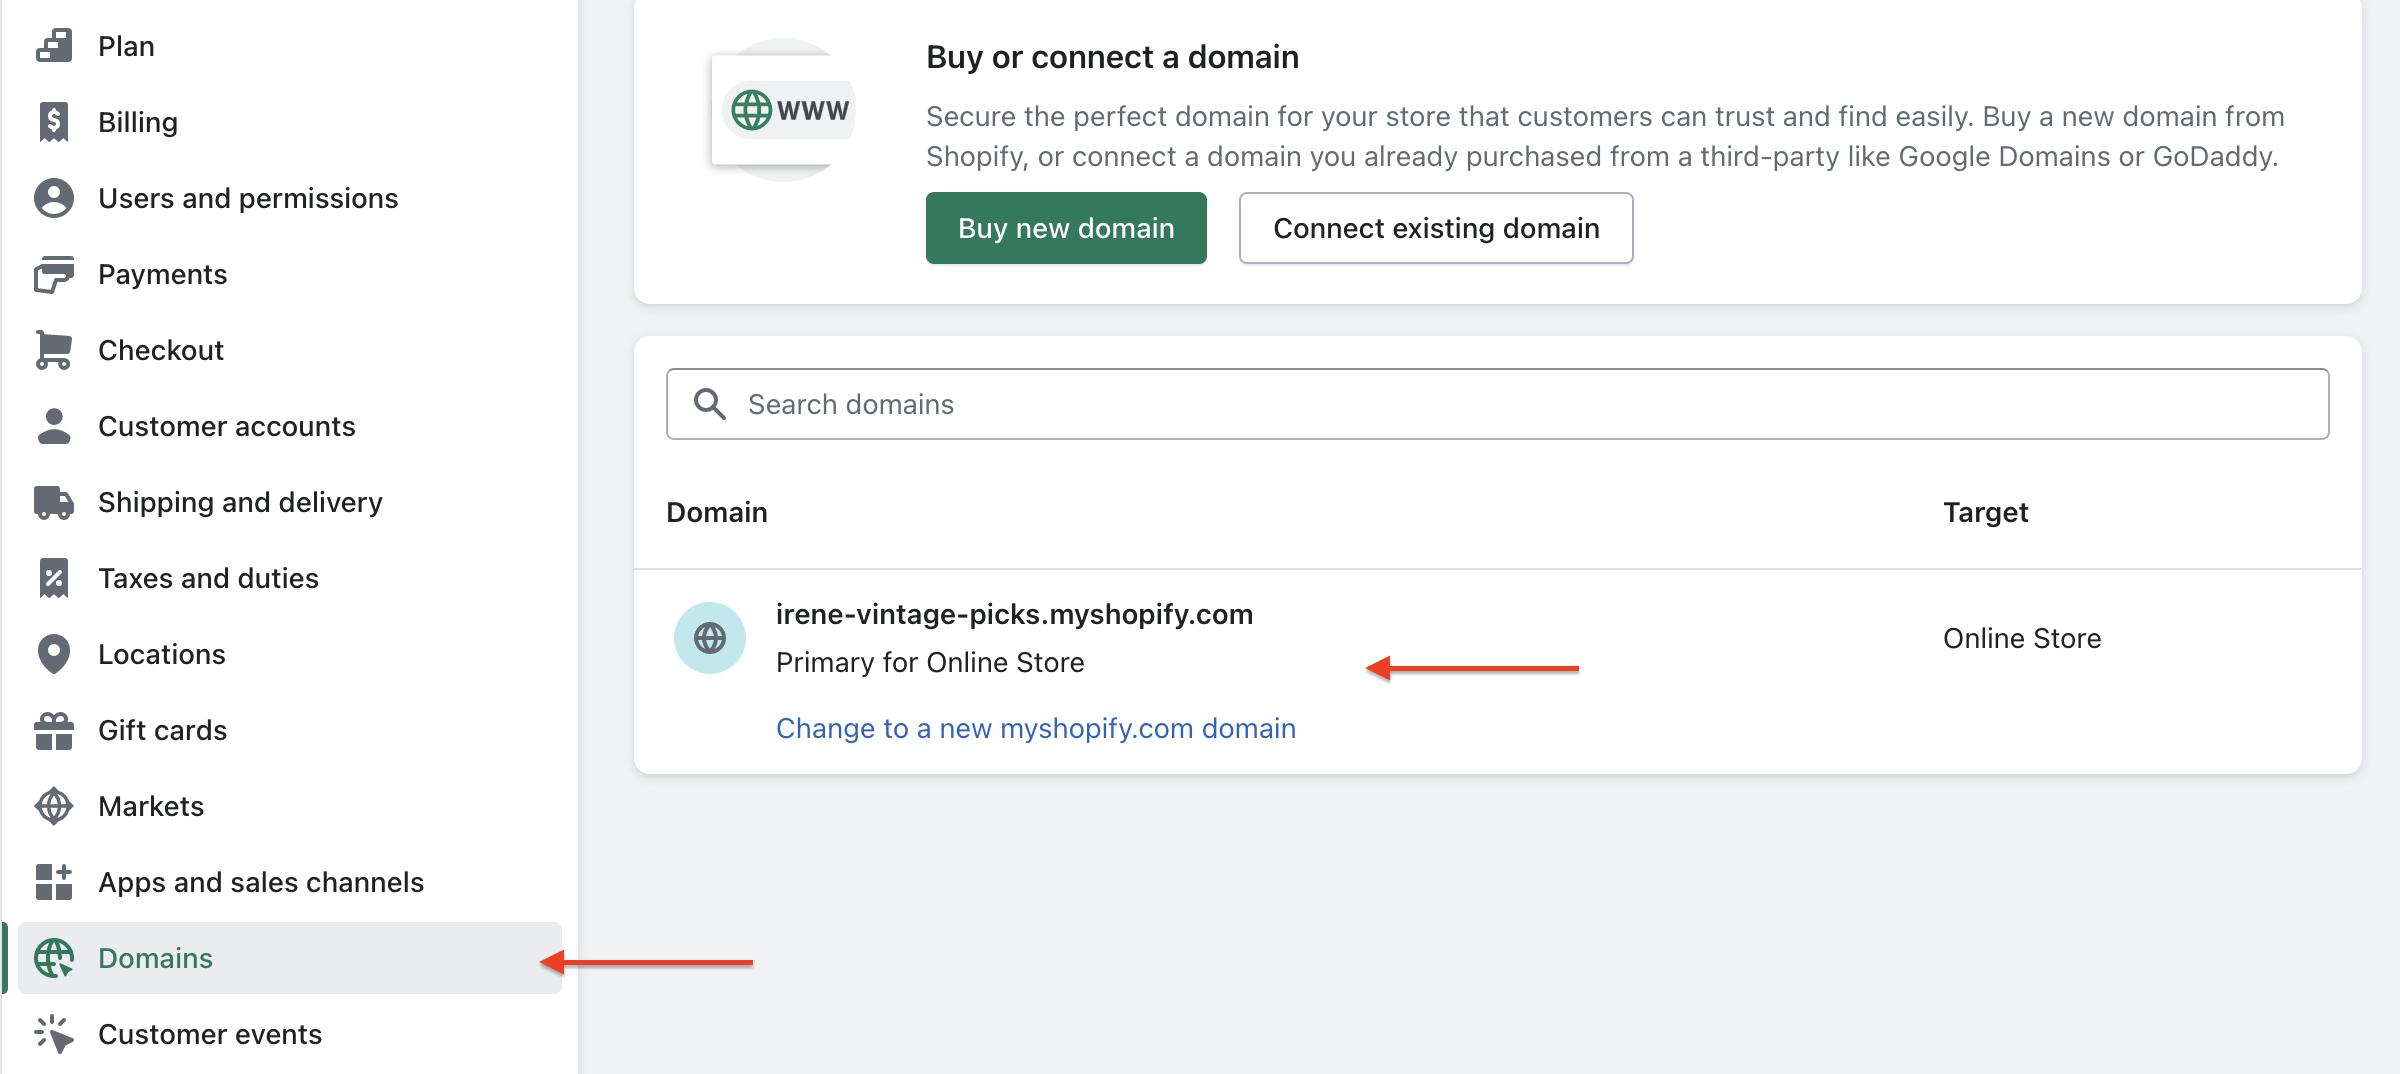 discontinue using shopify domain before cancelling shopify subscription